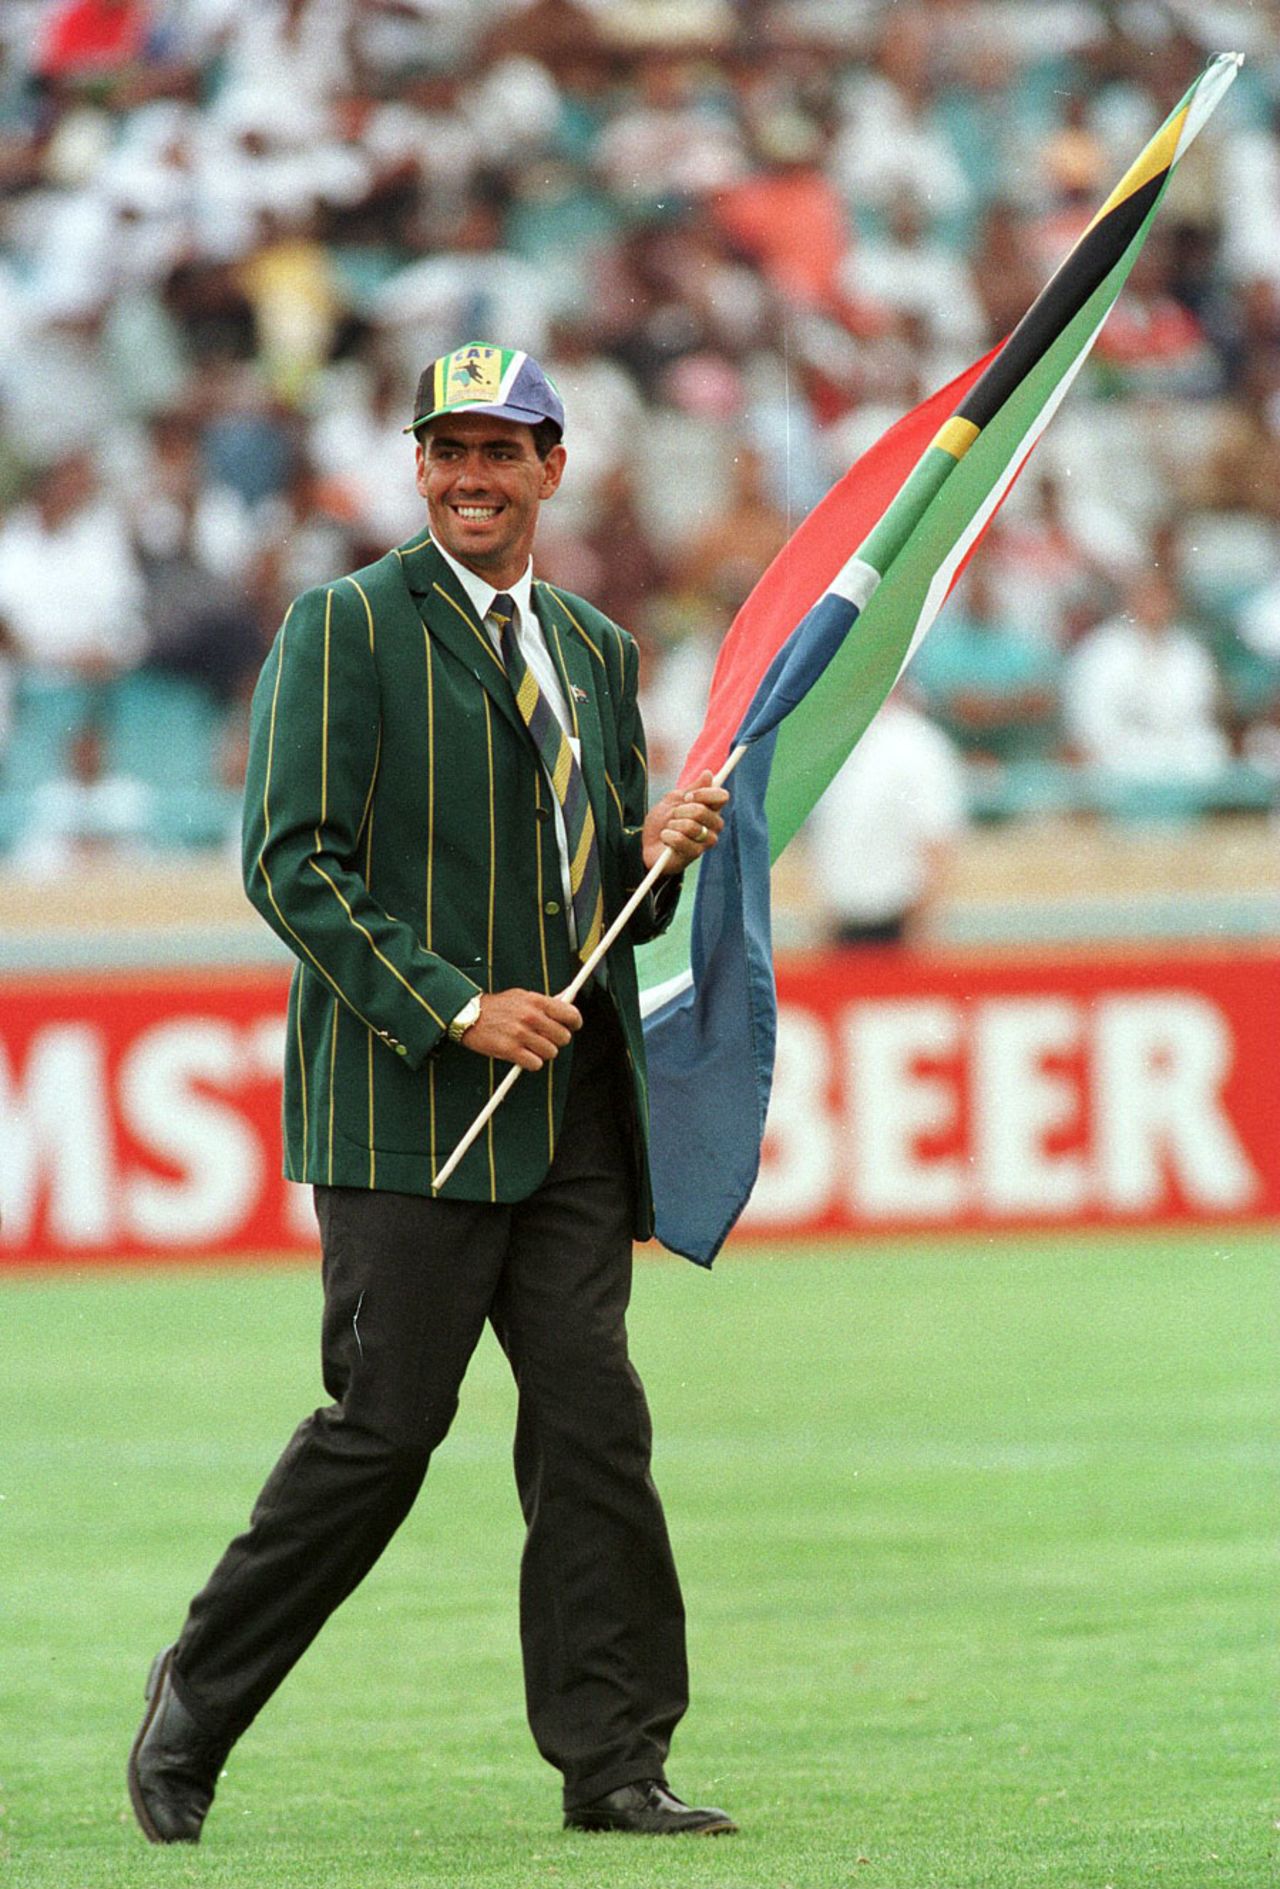 Hansie Cronje supports South Africa at a football match, Johannesburg, January 24, 1996